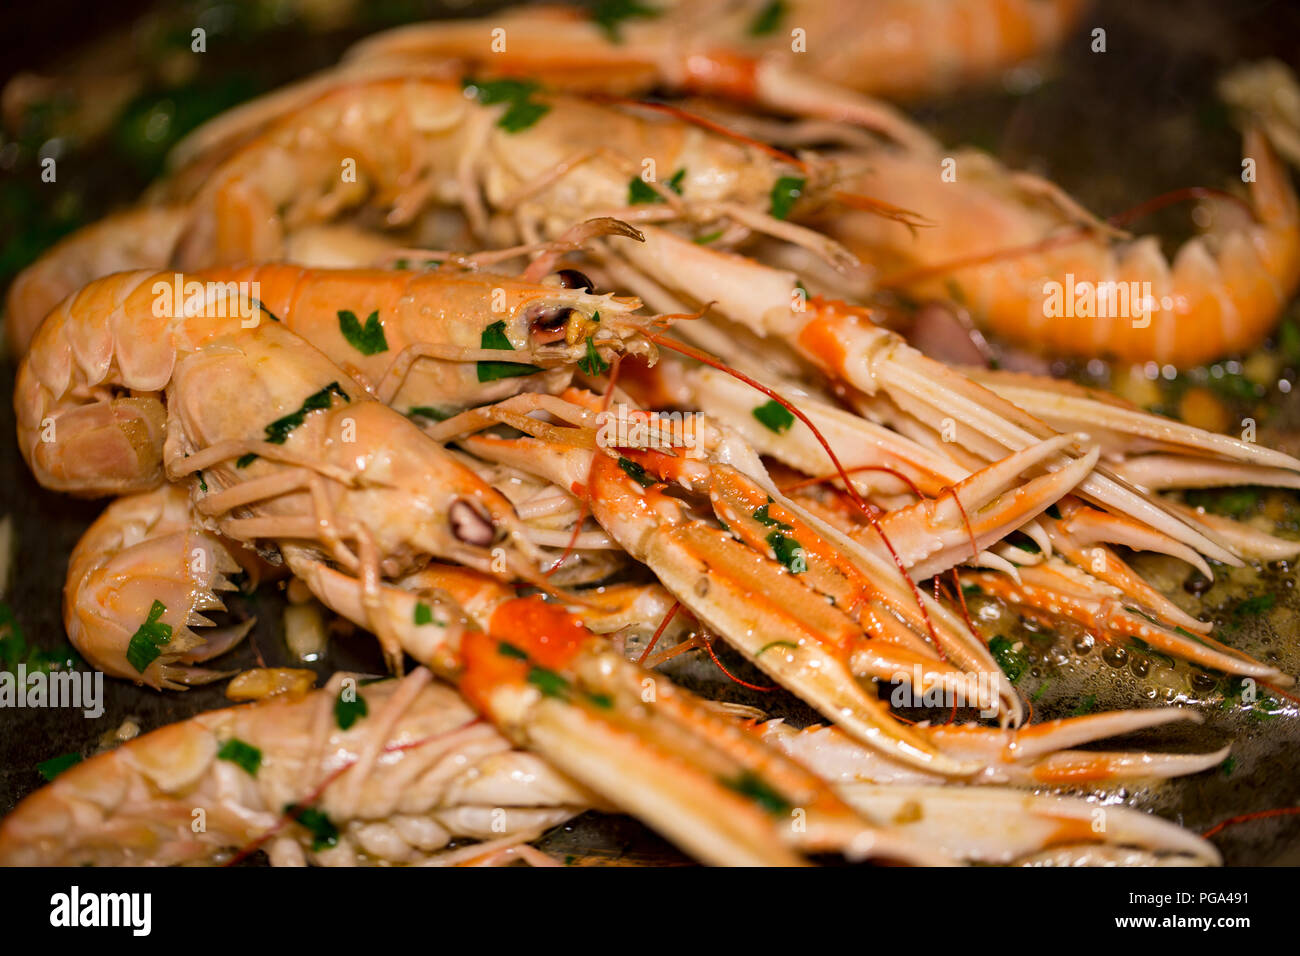 Scottish langoustines, Nephrops norvegicus, bought from a supermarket and photographed frying in a copper pan with butter, garlic and parsley. The lan Stock Photo